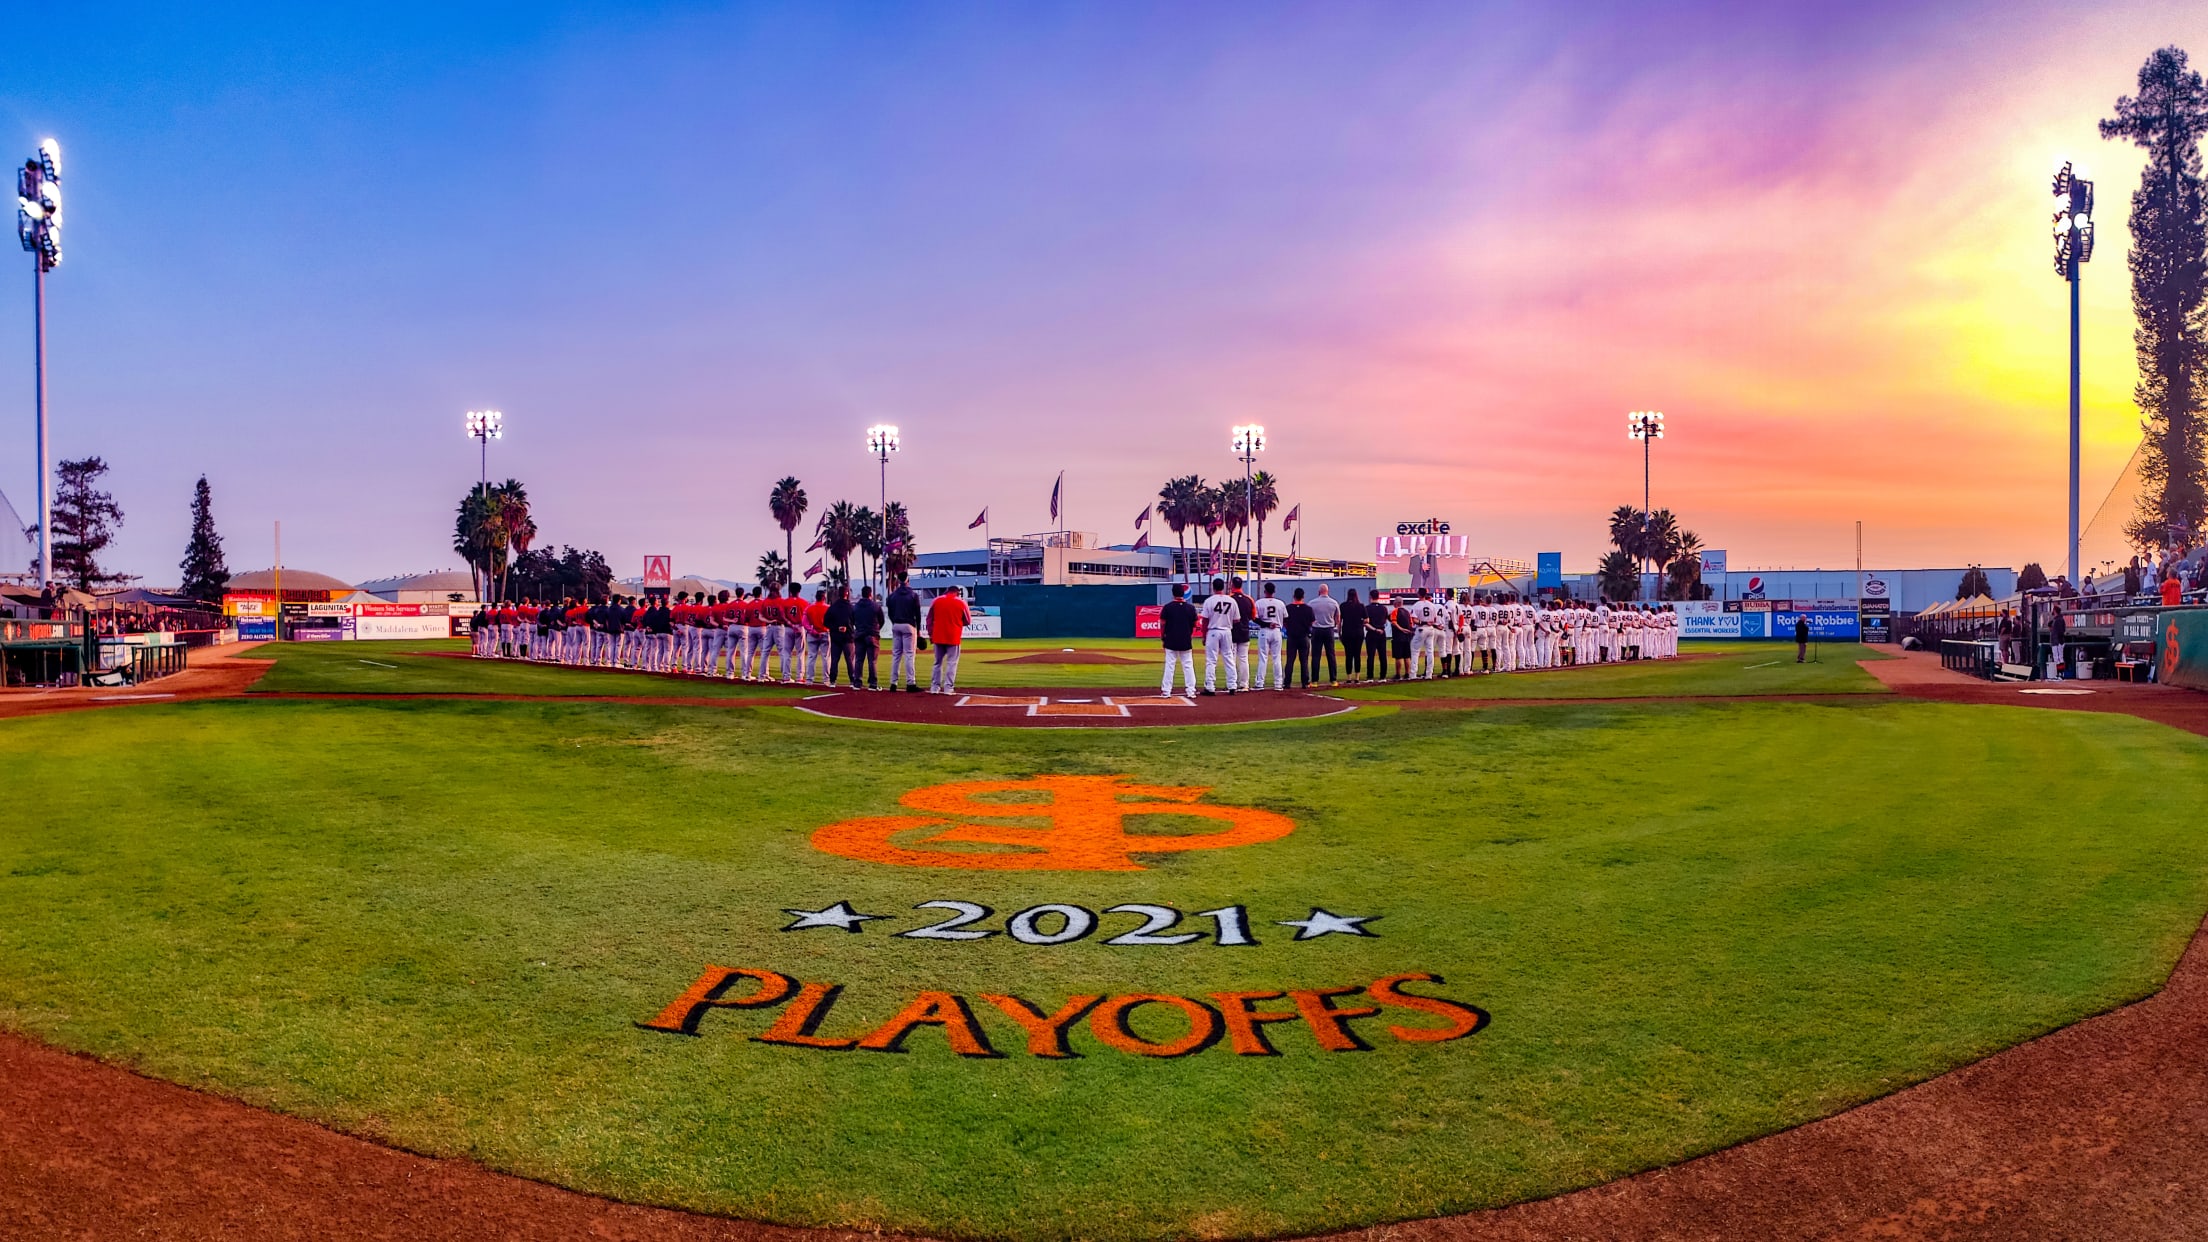 Visit Excite Ballpark home of the San Jose Giants